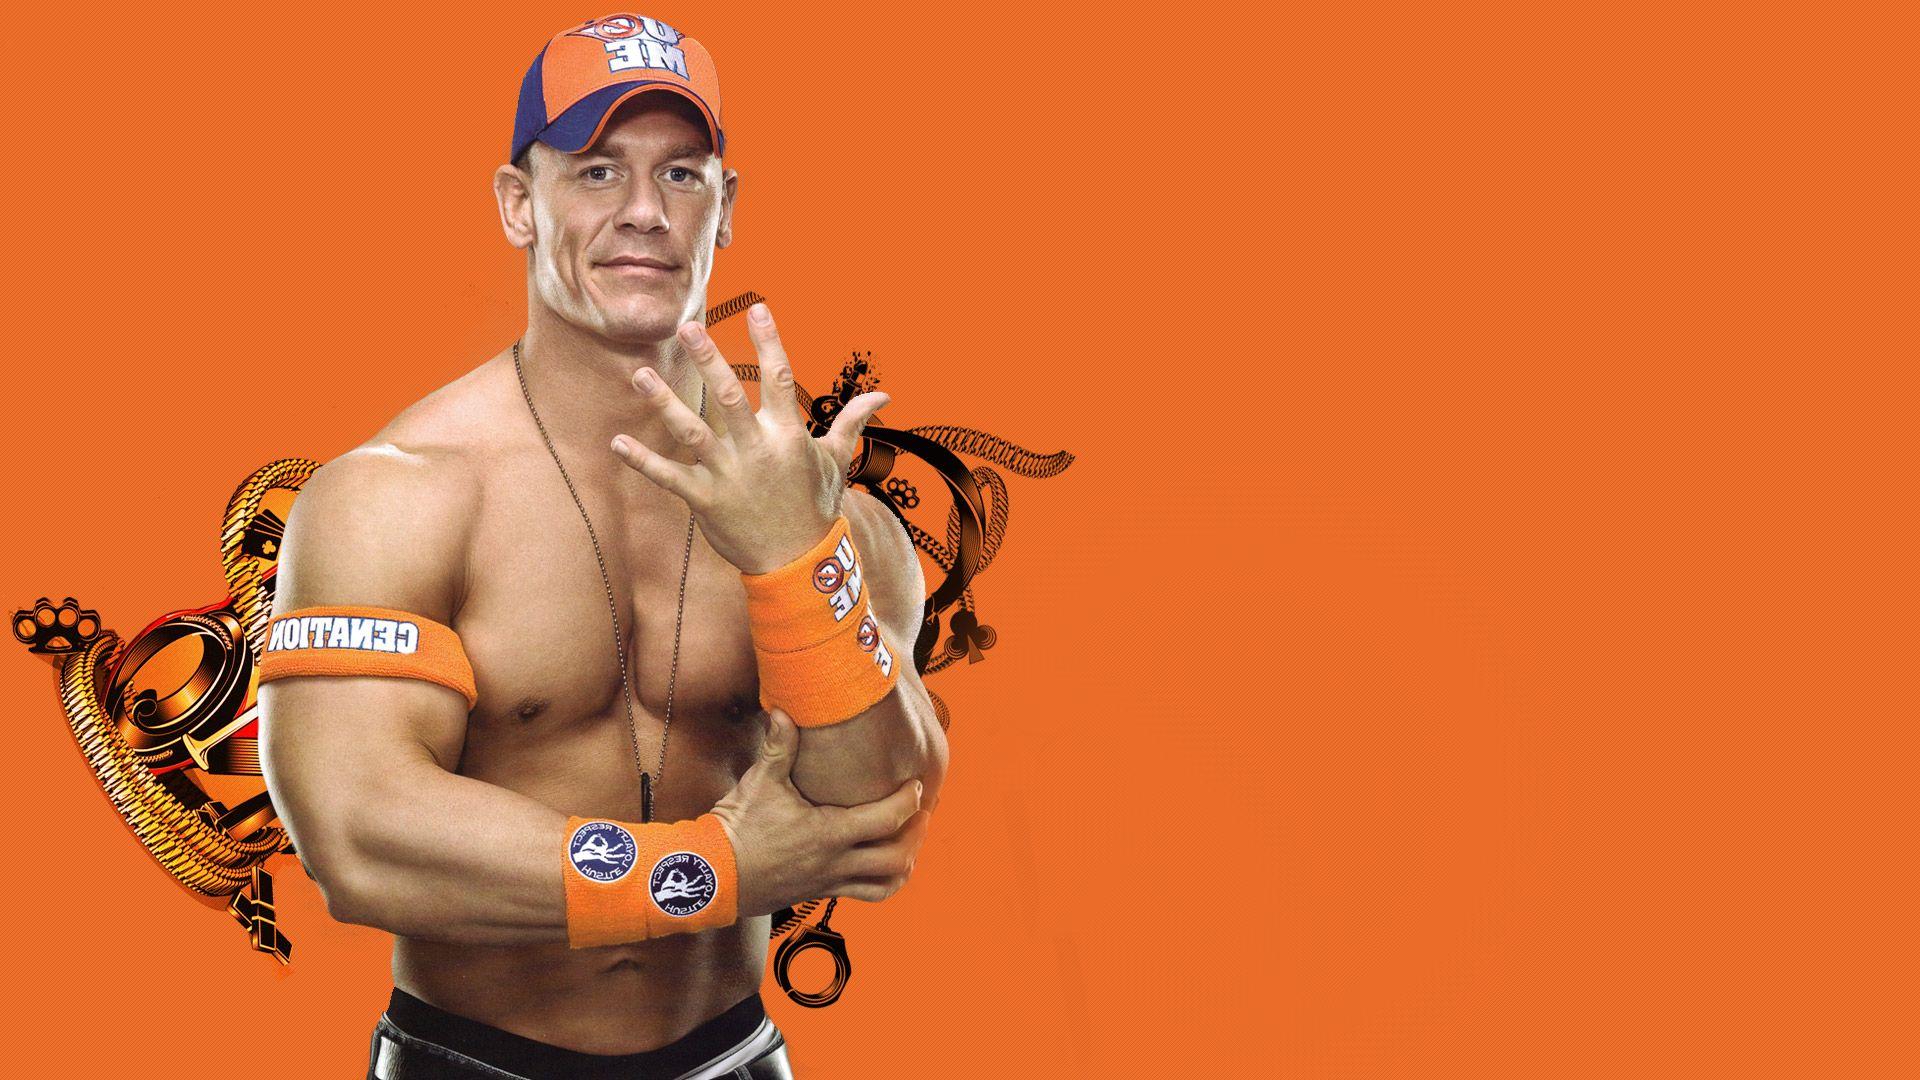 John Cena Wallpaper Background With 2017 Latest HD Photo Download